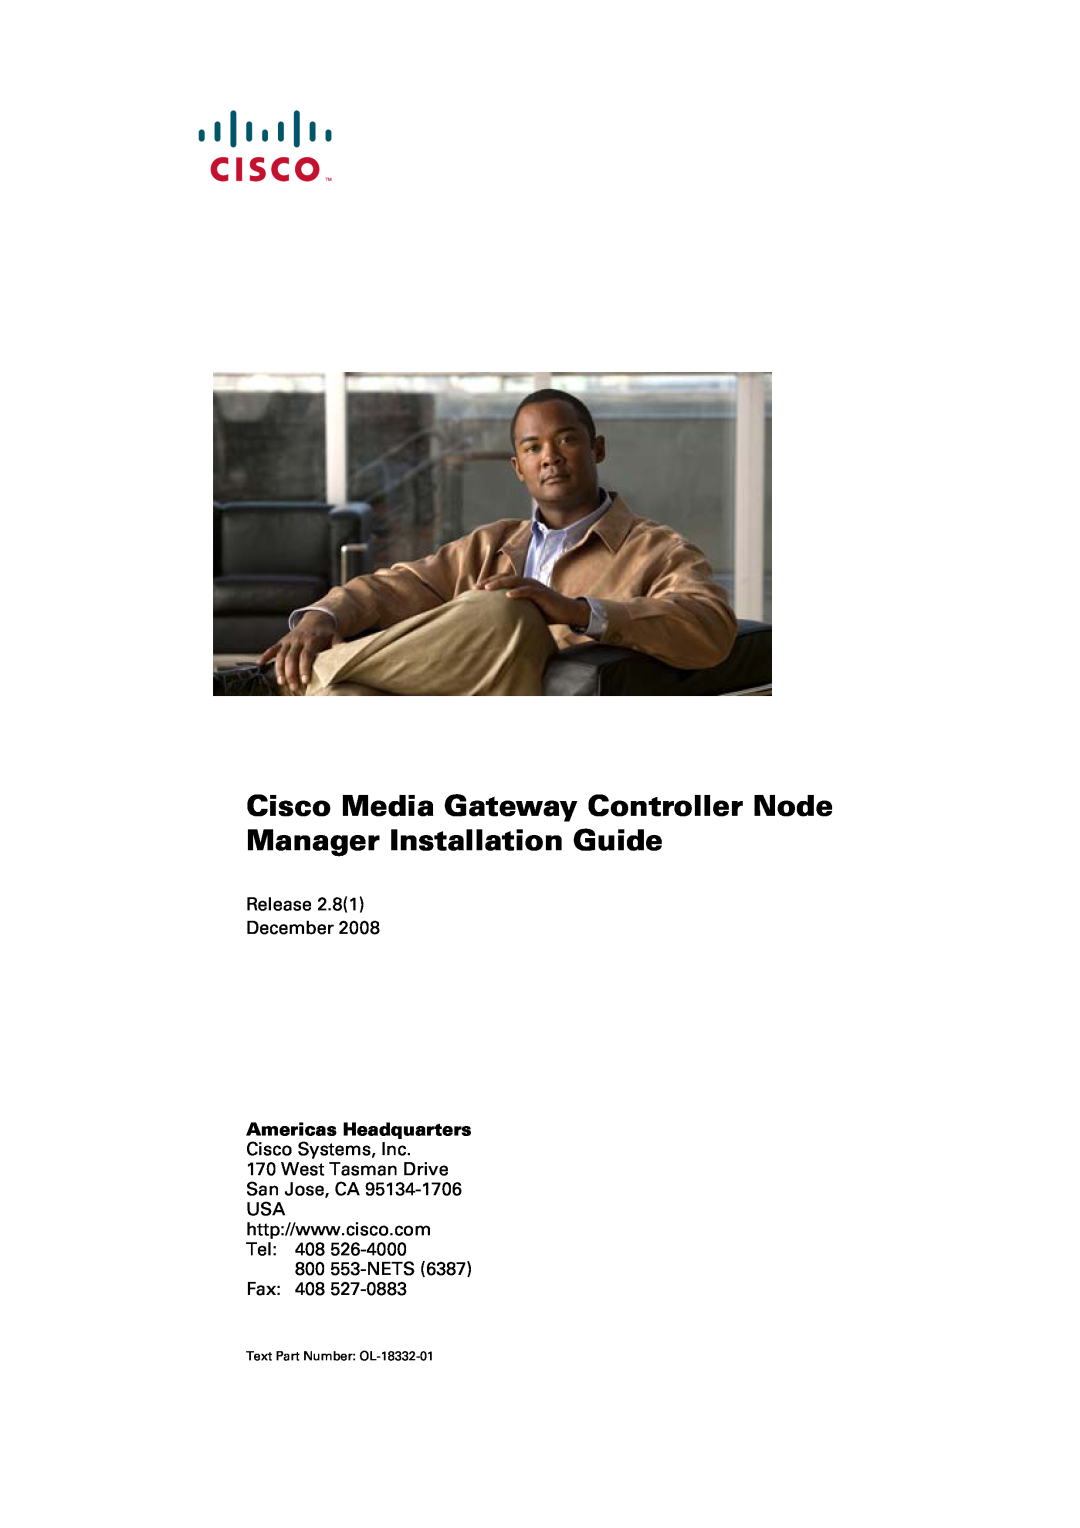 Cisco Systems Media Gateway Controller Node Manager manual Americas Headquarters, Release December, 800 553-NETS Fax 